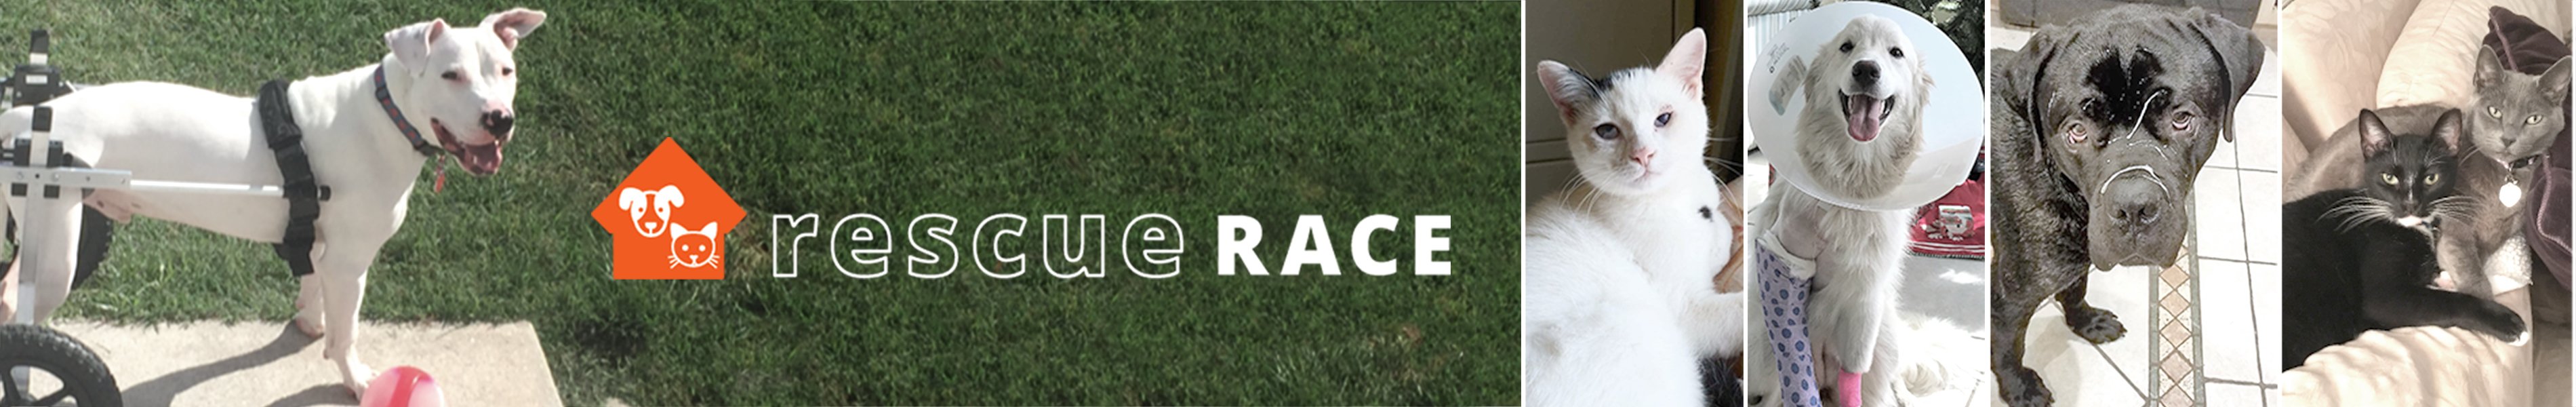 Rescue Race | Healthy Paws Foundation